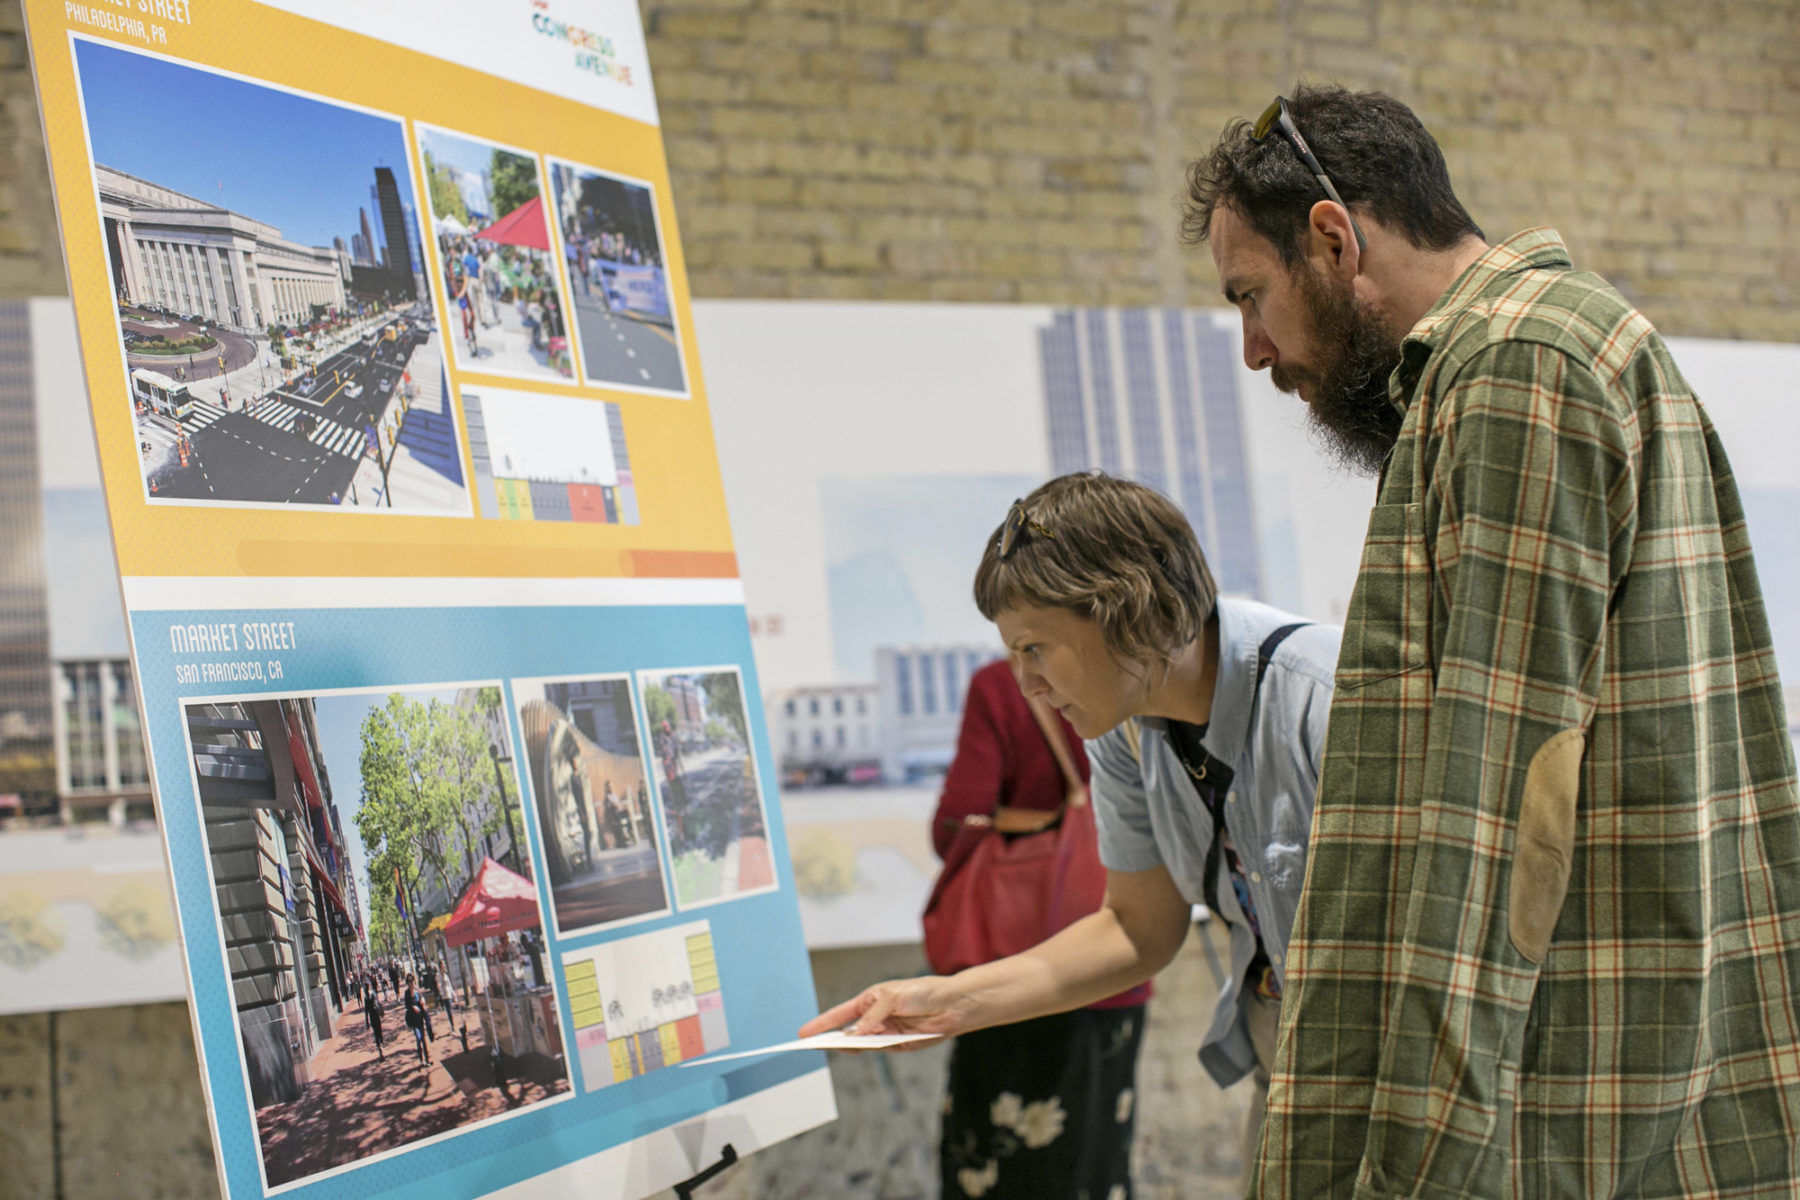 Photo of a man and a woman looking at a board that has pictures and sections of similar streets in other major cities. The woman is crouched down and pointing to a street section and the man looks down at it. He is wearing a green plaid shirt.